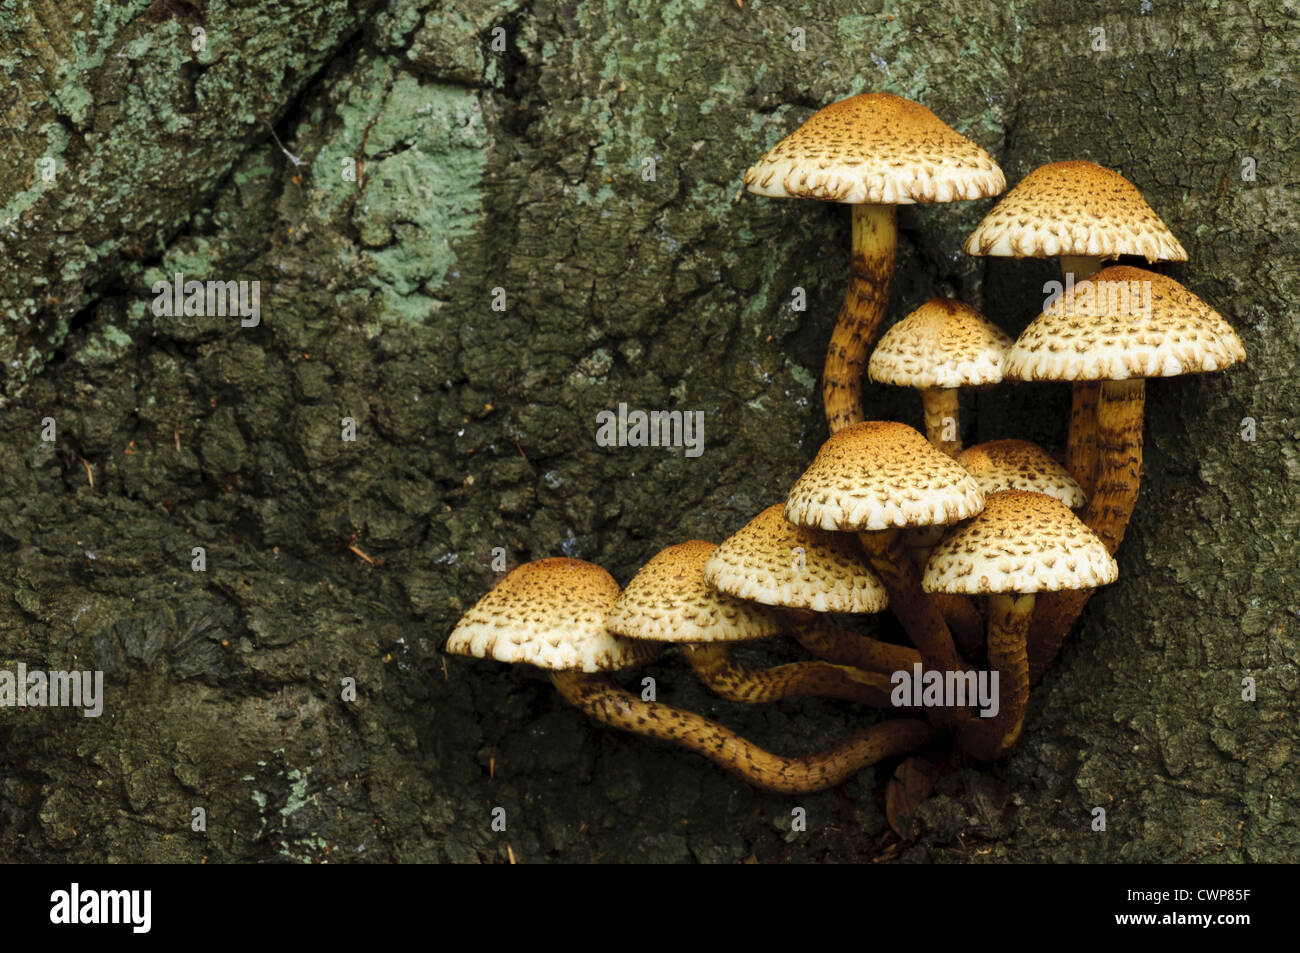 Shaggy Scalycap (Pholiota squarrosa) fruiting bodies, group growing from tree trunk, Clumber Park, Nottinghamshire, England, Stock Photo